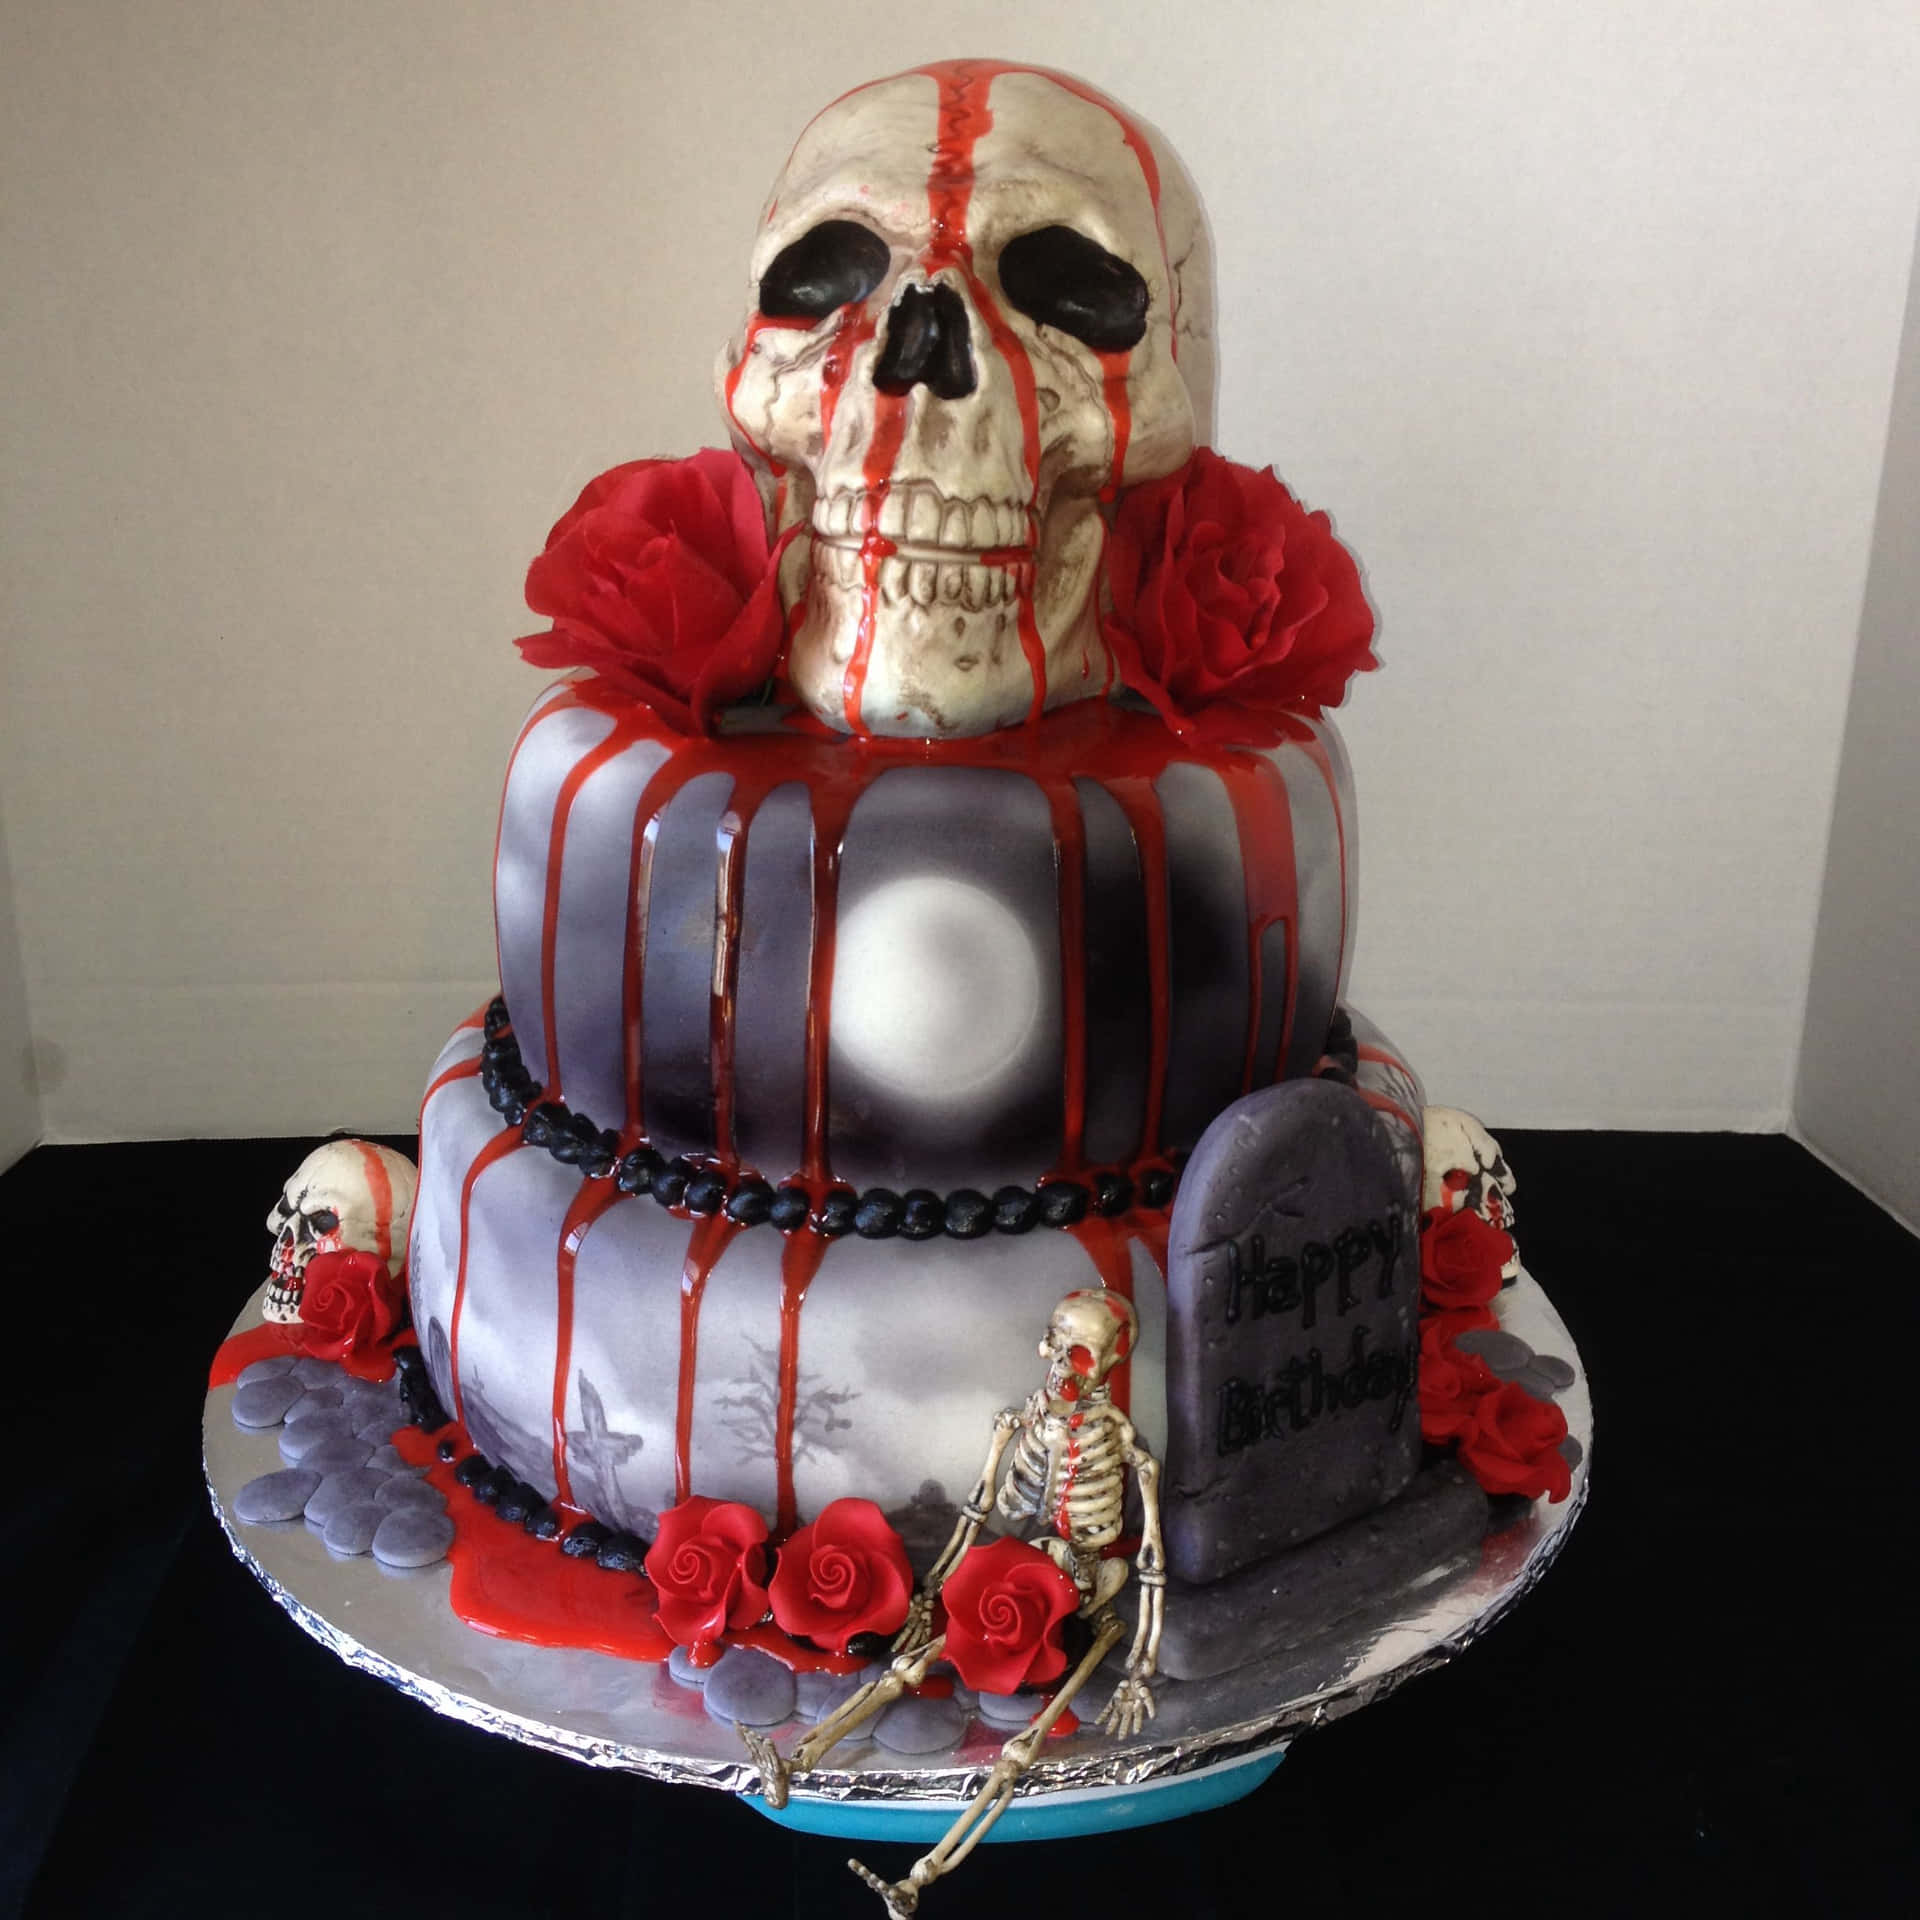 A Cake With A Skull On Top